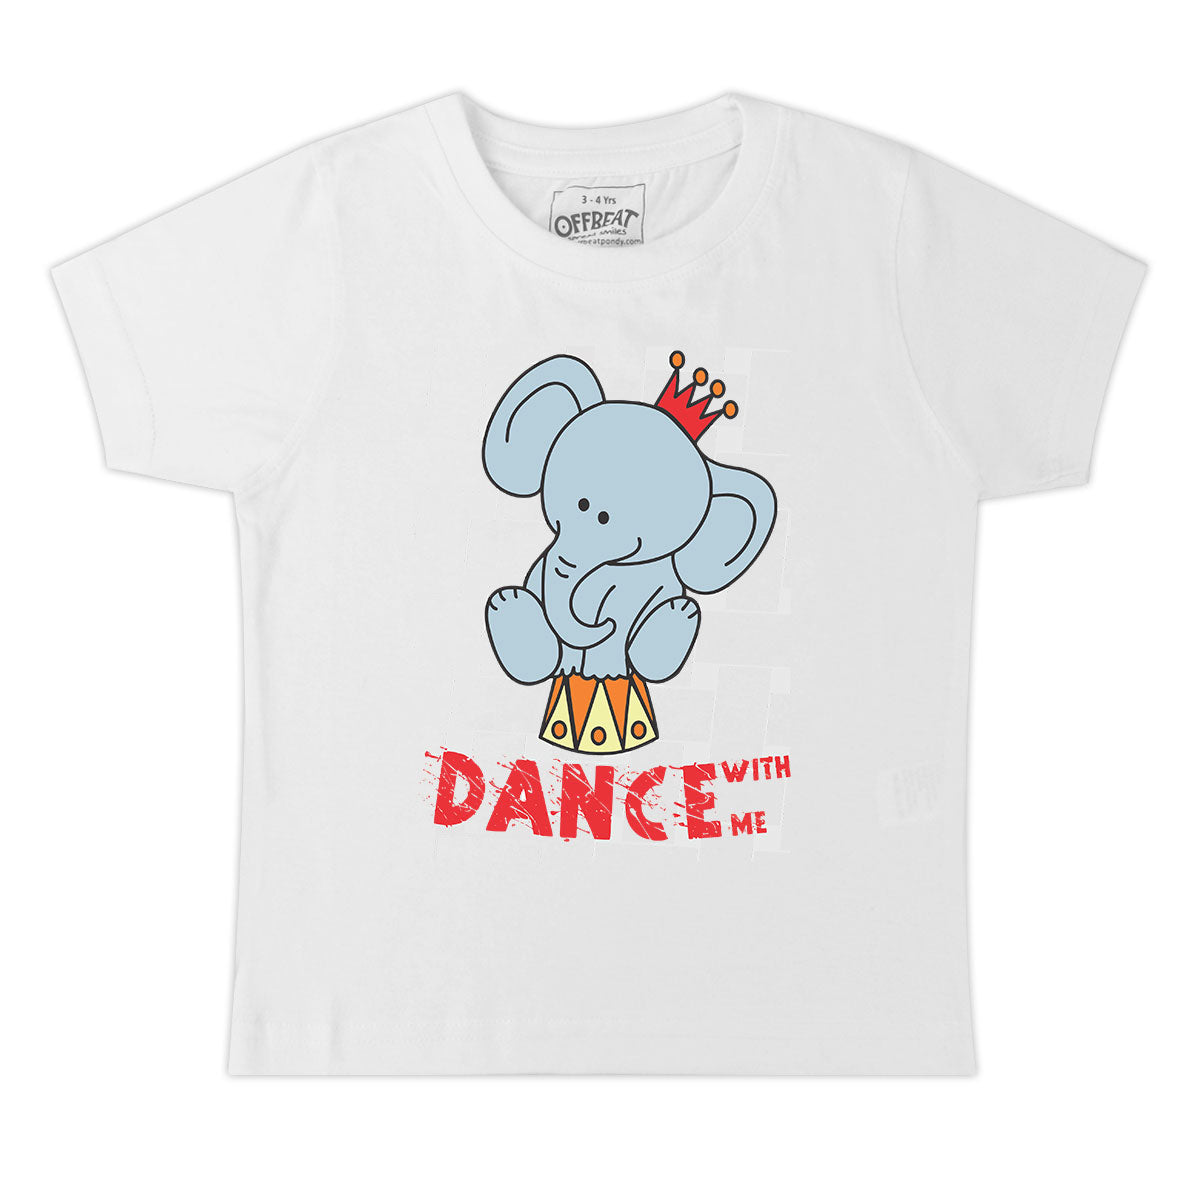 Dance With Me - Premium Round Neck Cotton Tees for Kids - White